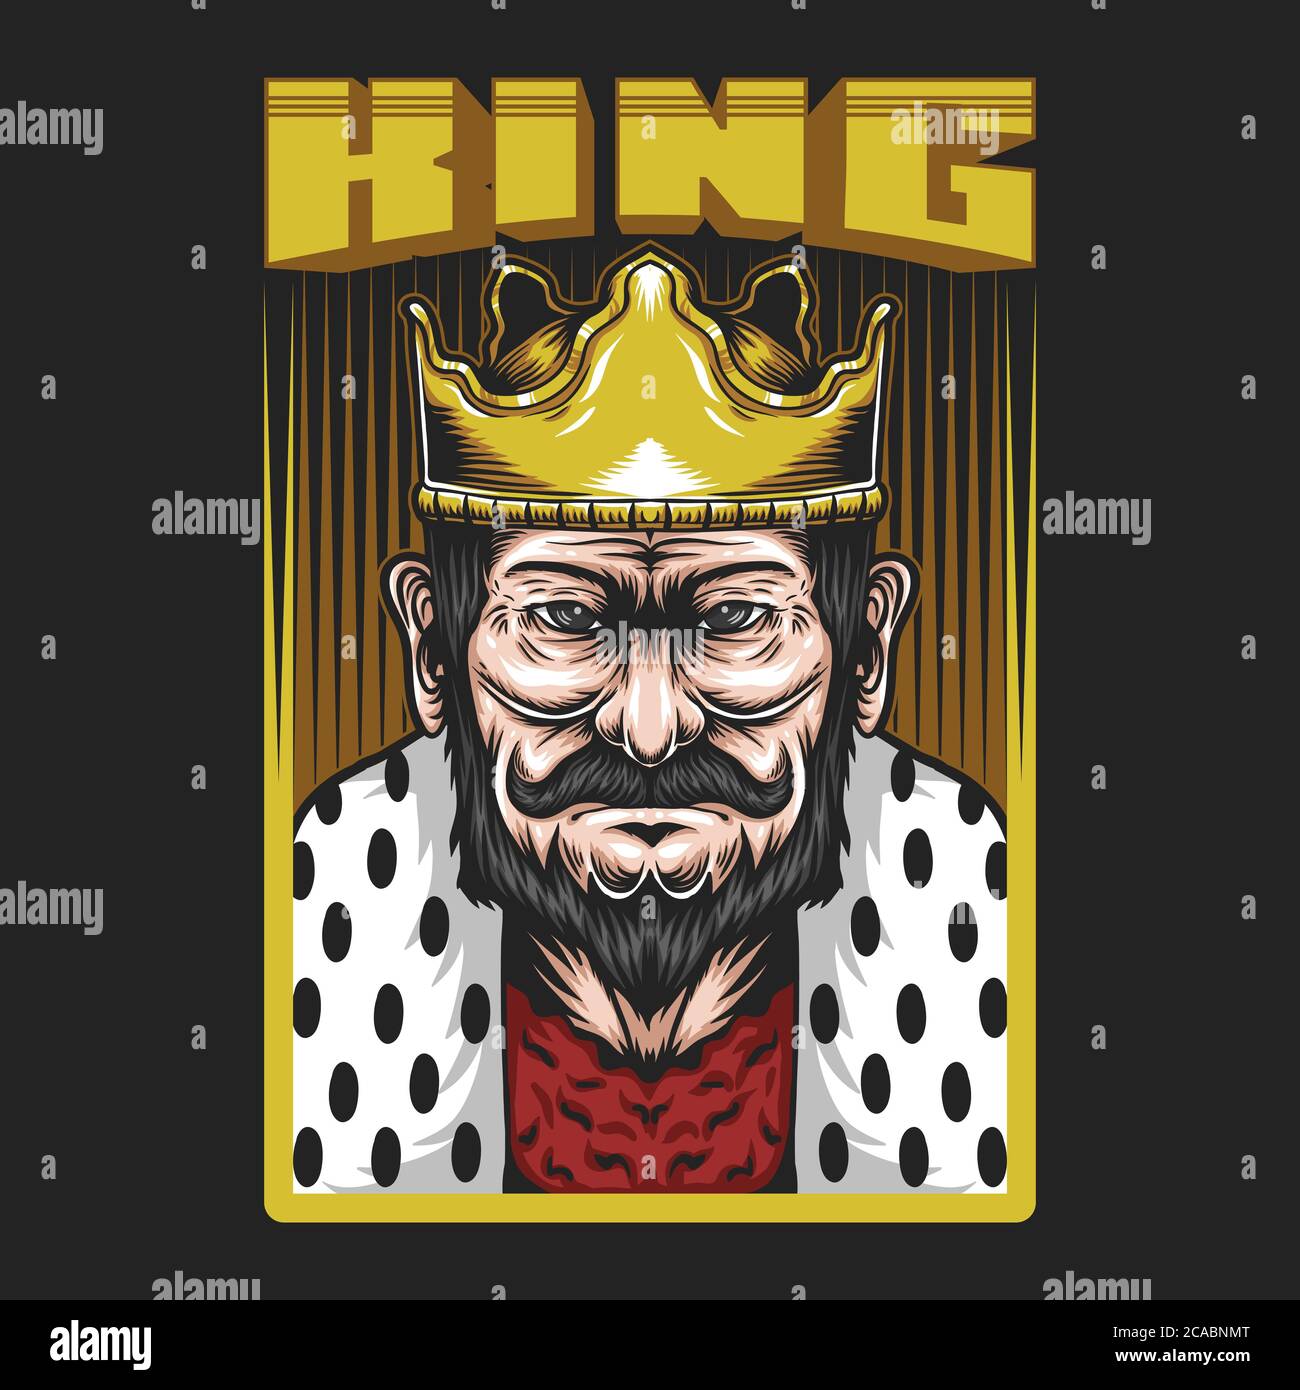 King Man Vector illustration for your company or brand Stock Vector